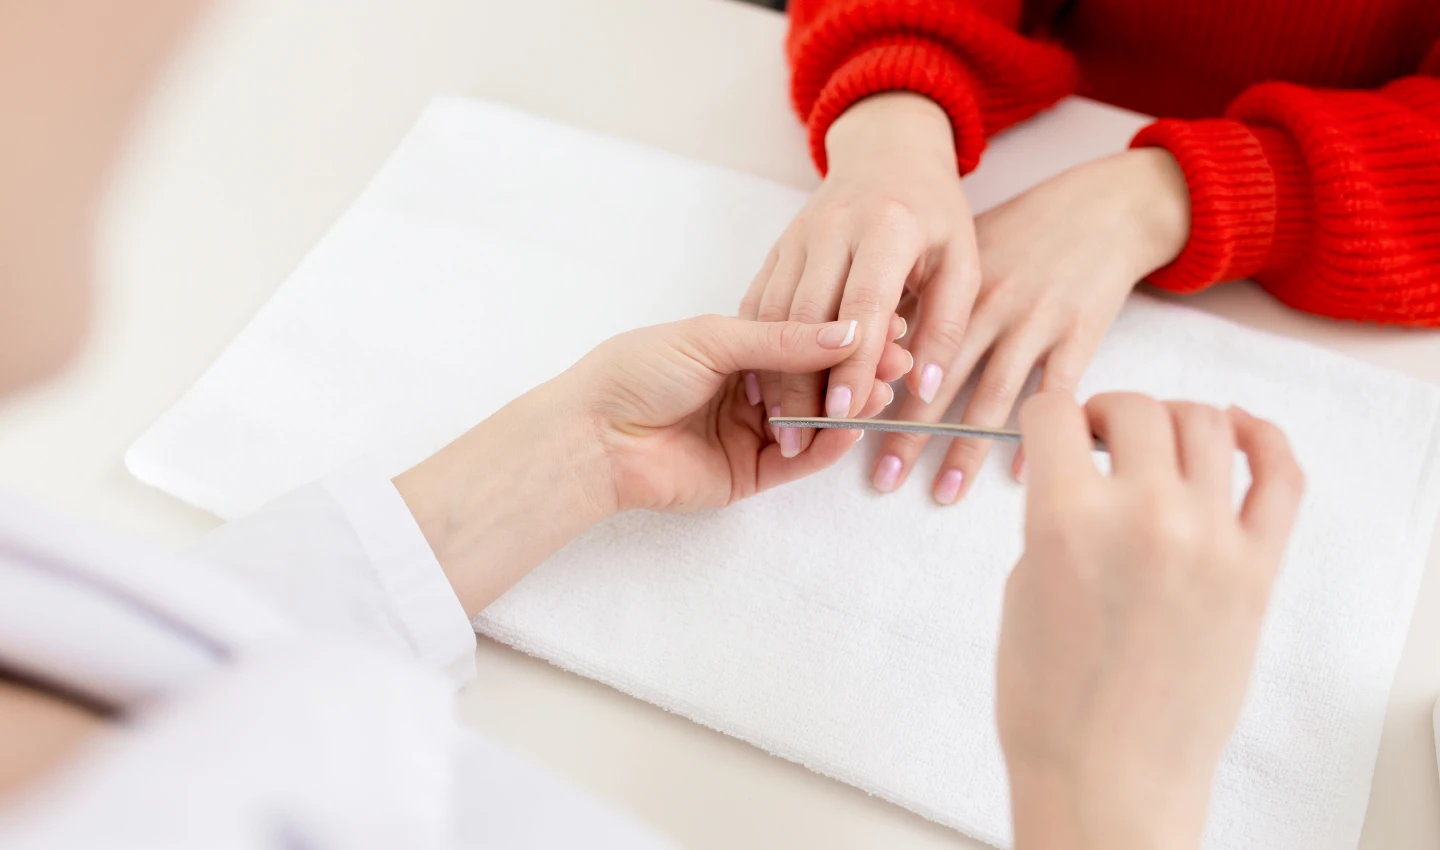 A woman receiving a professional manicure as part of a professional nail treatment, with a skilled nail technician attending to her nails.